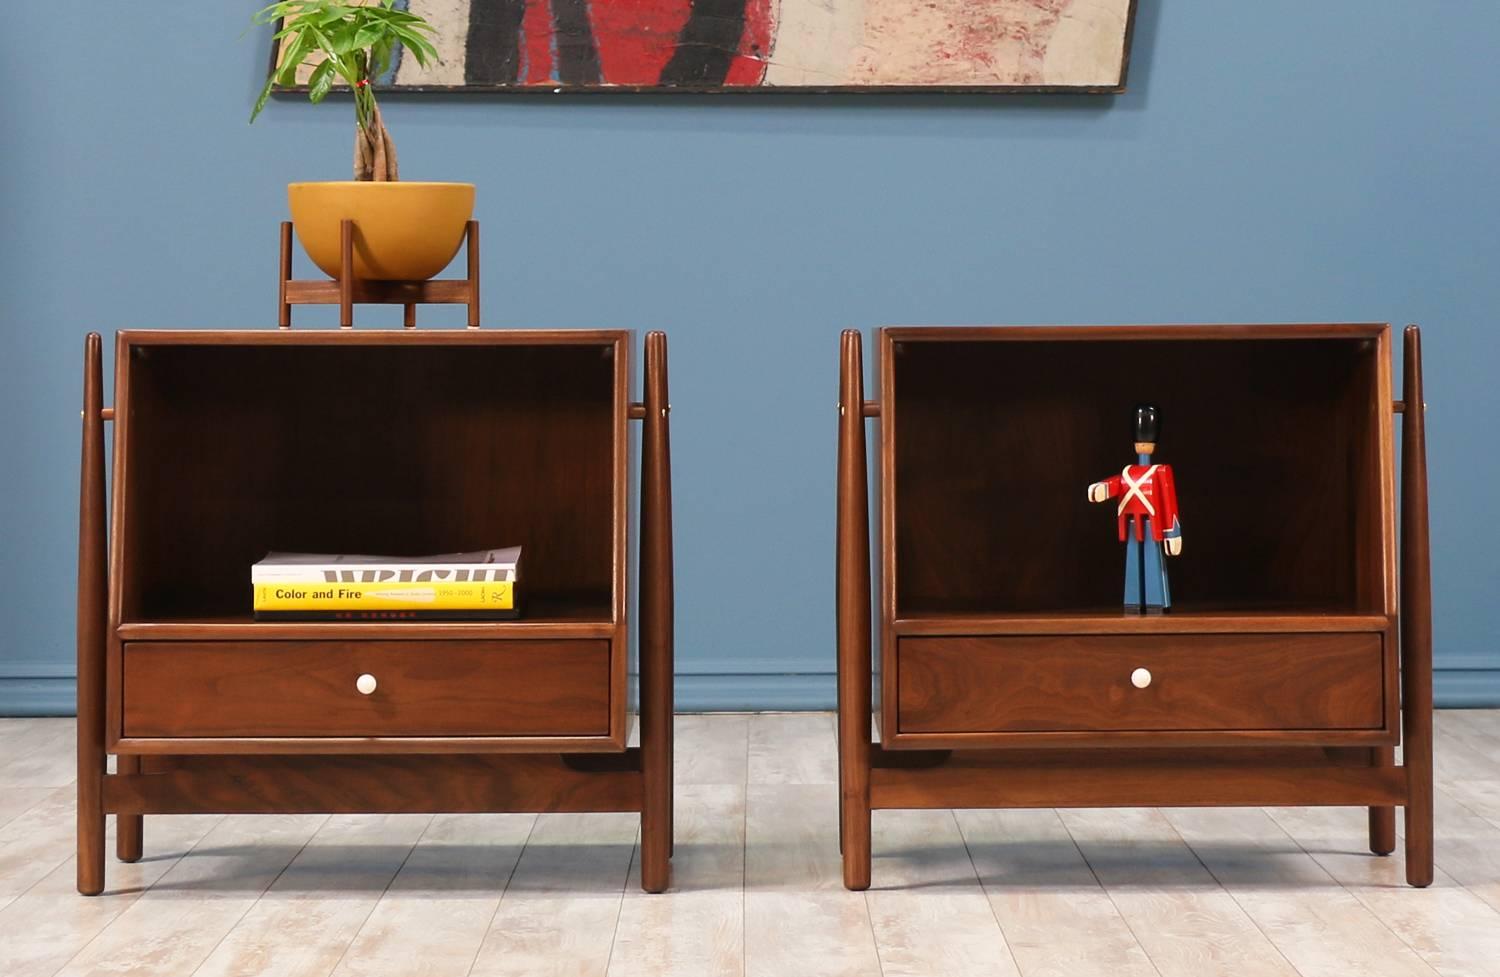 A pair of Night Stands designed by Kipp Stewart & Stewart MacDougall for Drexel in the United States circa 1960’s. These newly restored walnut nightstands feature an open compartment above and a small dovetailed drawer below accented with the